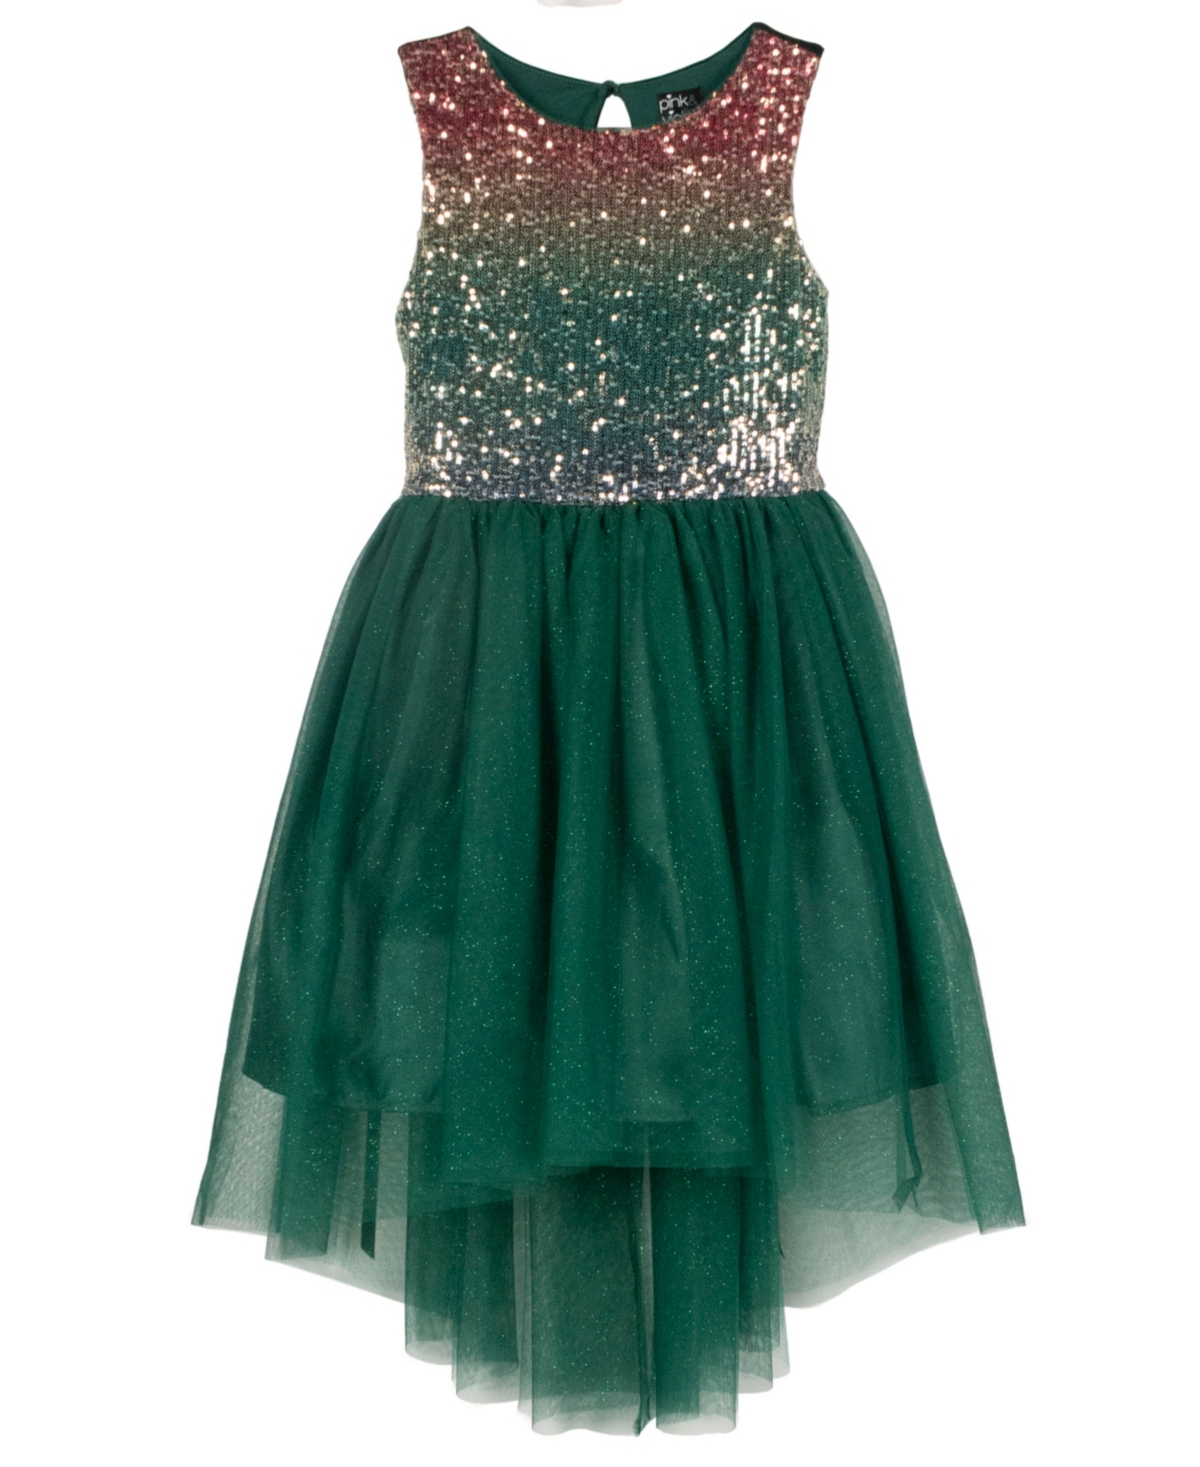 Pink & Violet Kids' Big Girls Sleeveless Ombre Sequin High-low Dress In Green,multi